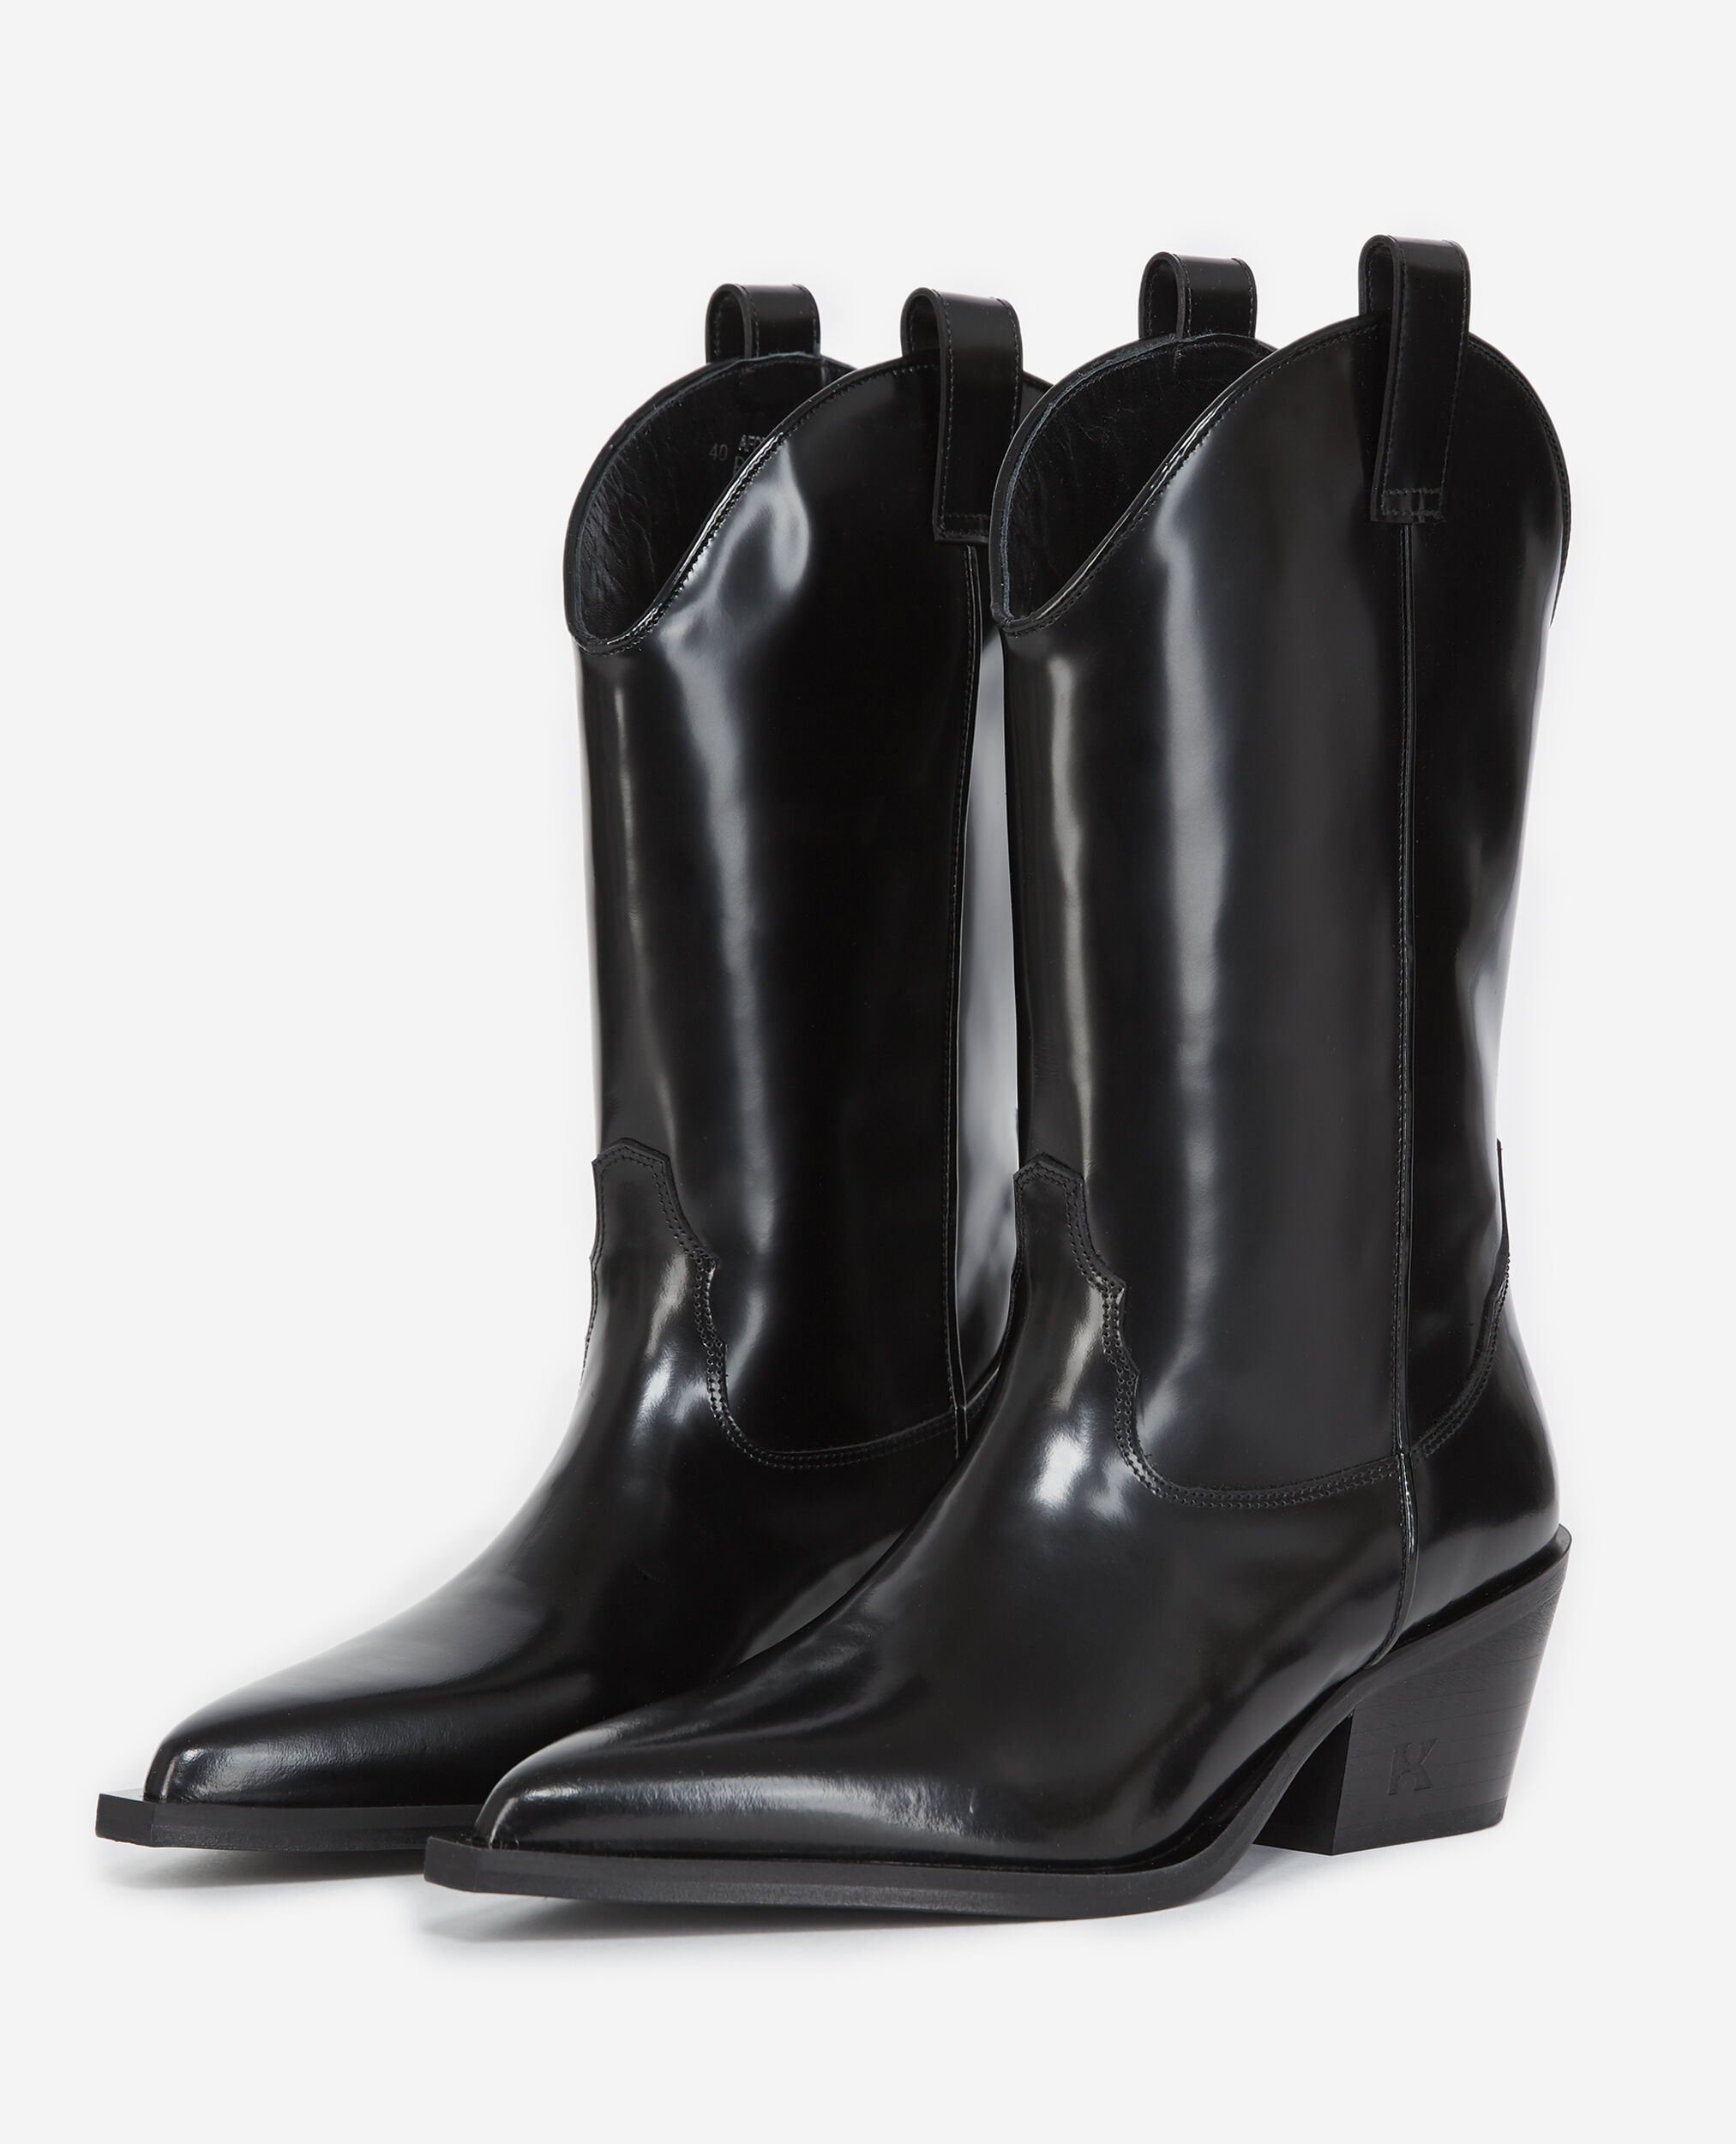 Bottines talons cuir glacé style western, BLACK, hi-res image number null